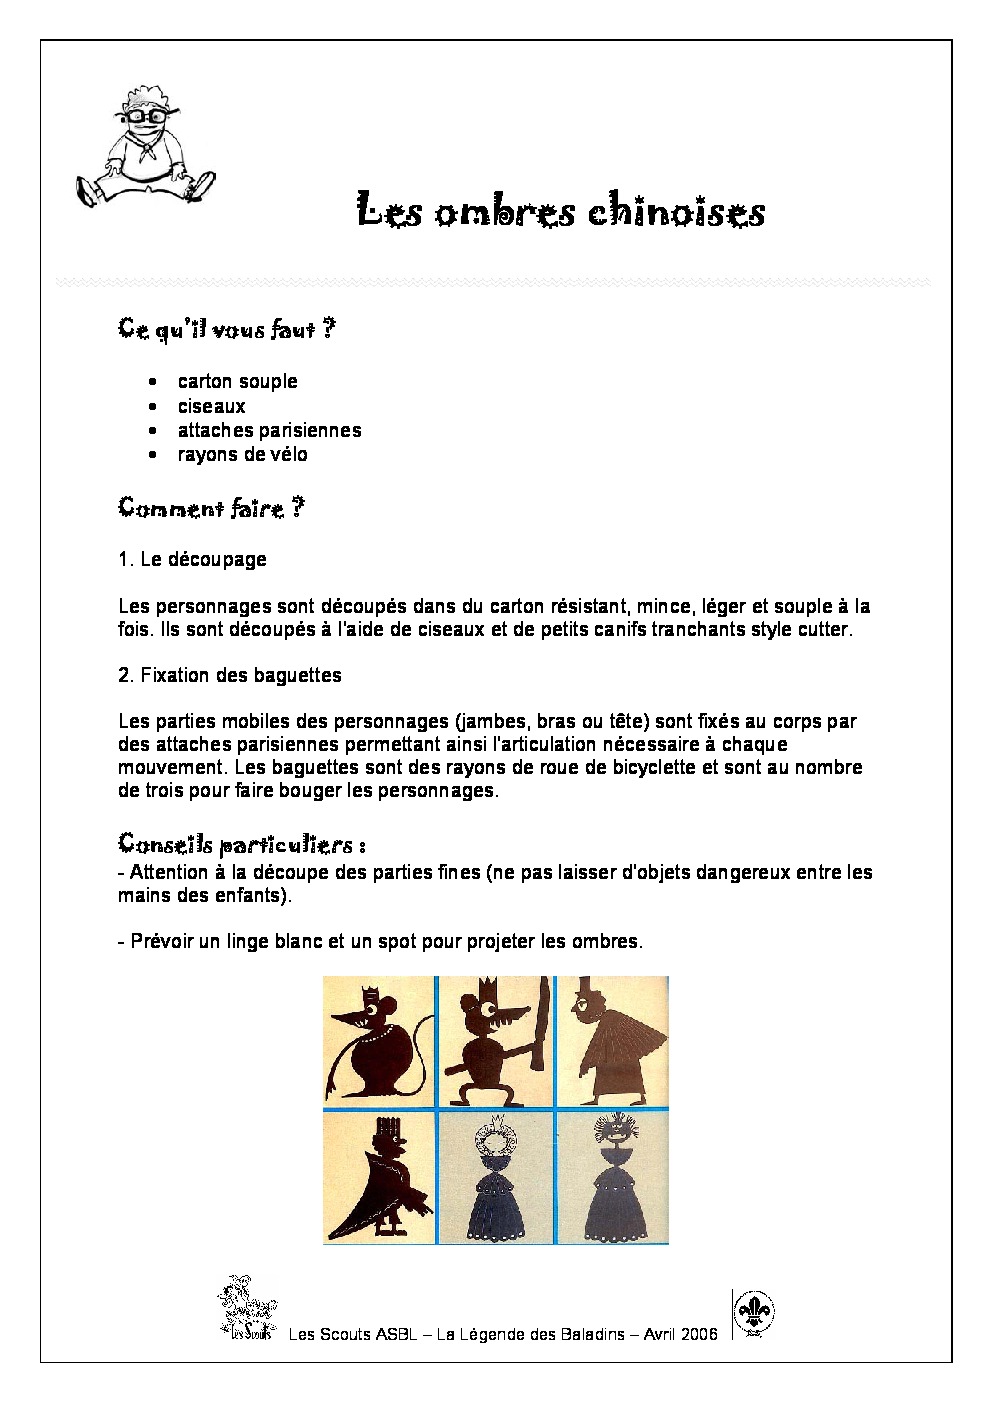 FT_Les_ombres_chinoises.pdf